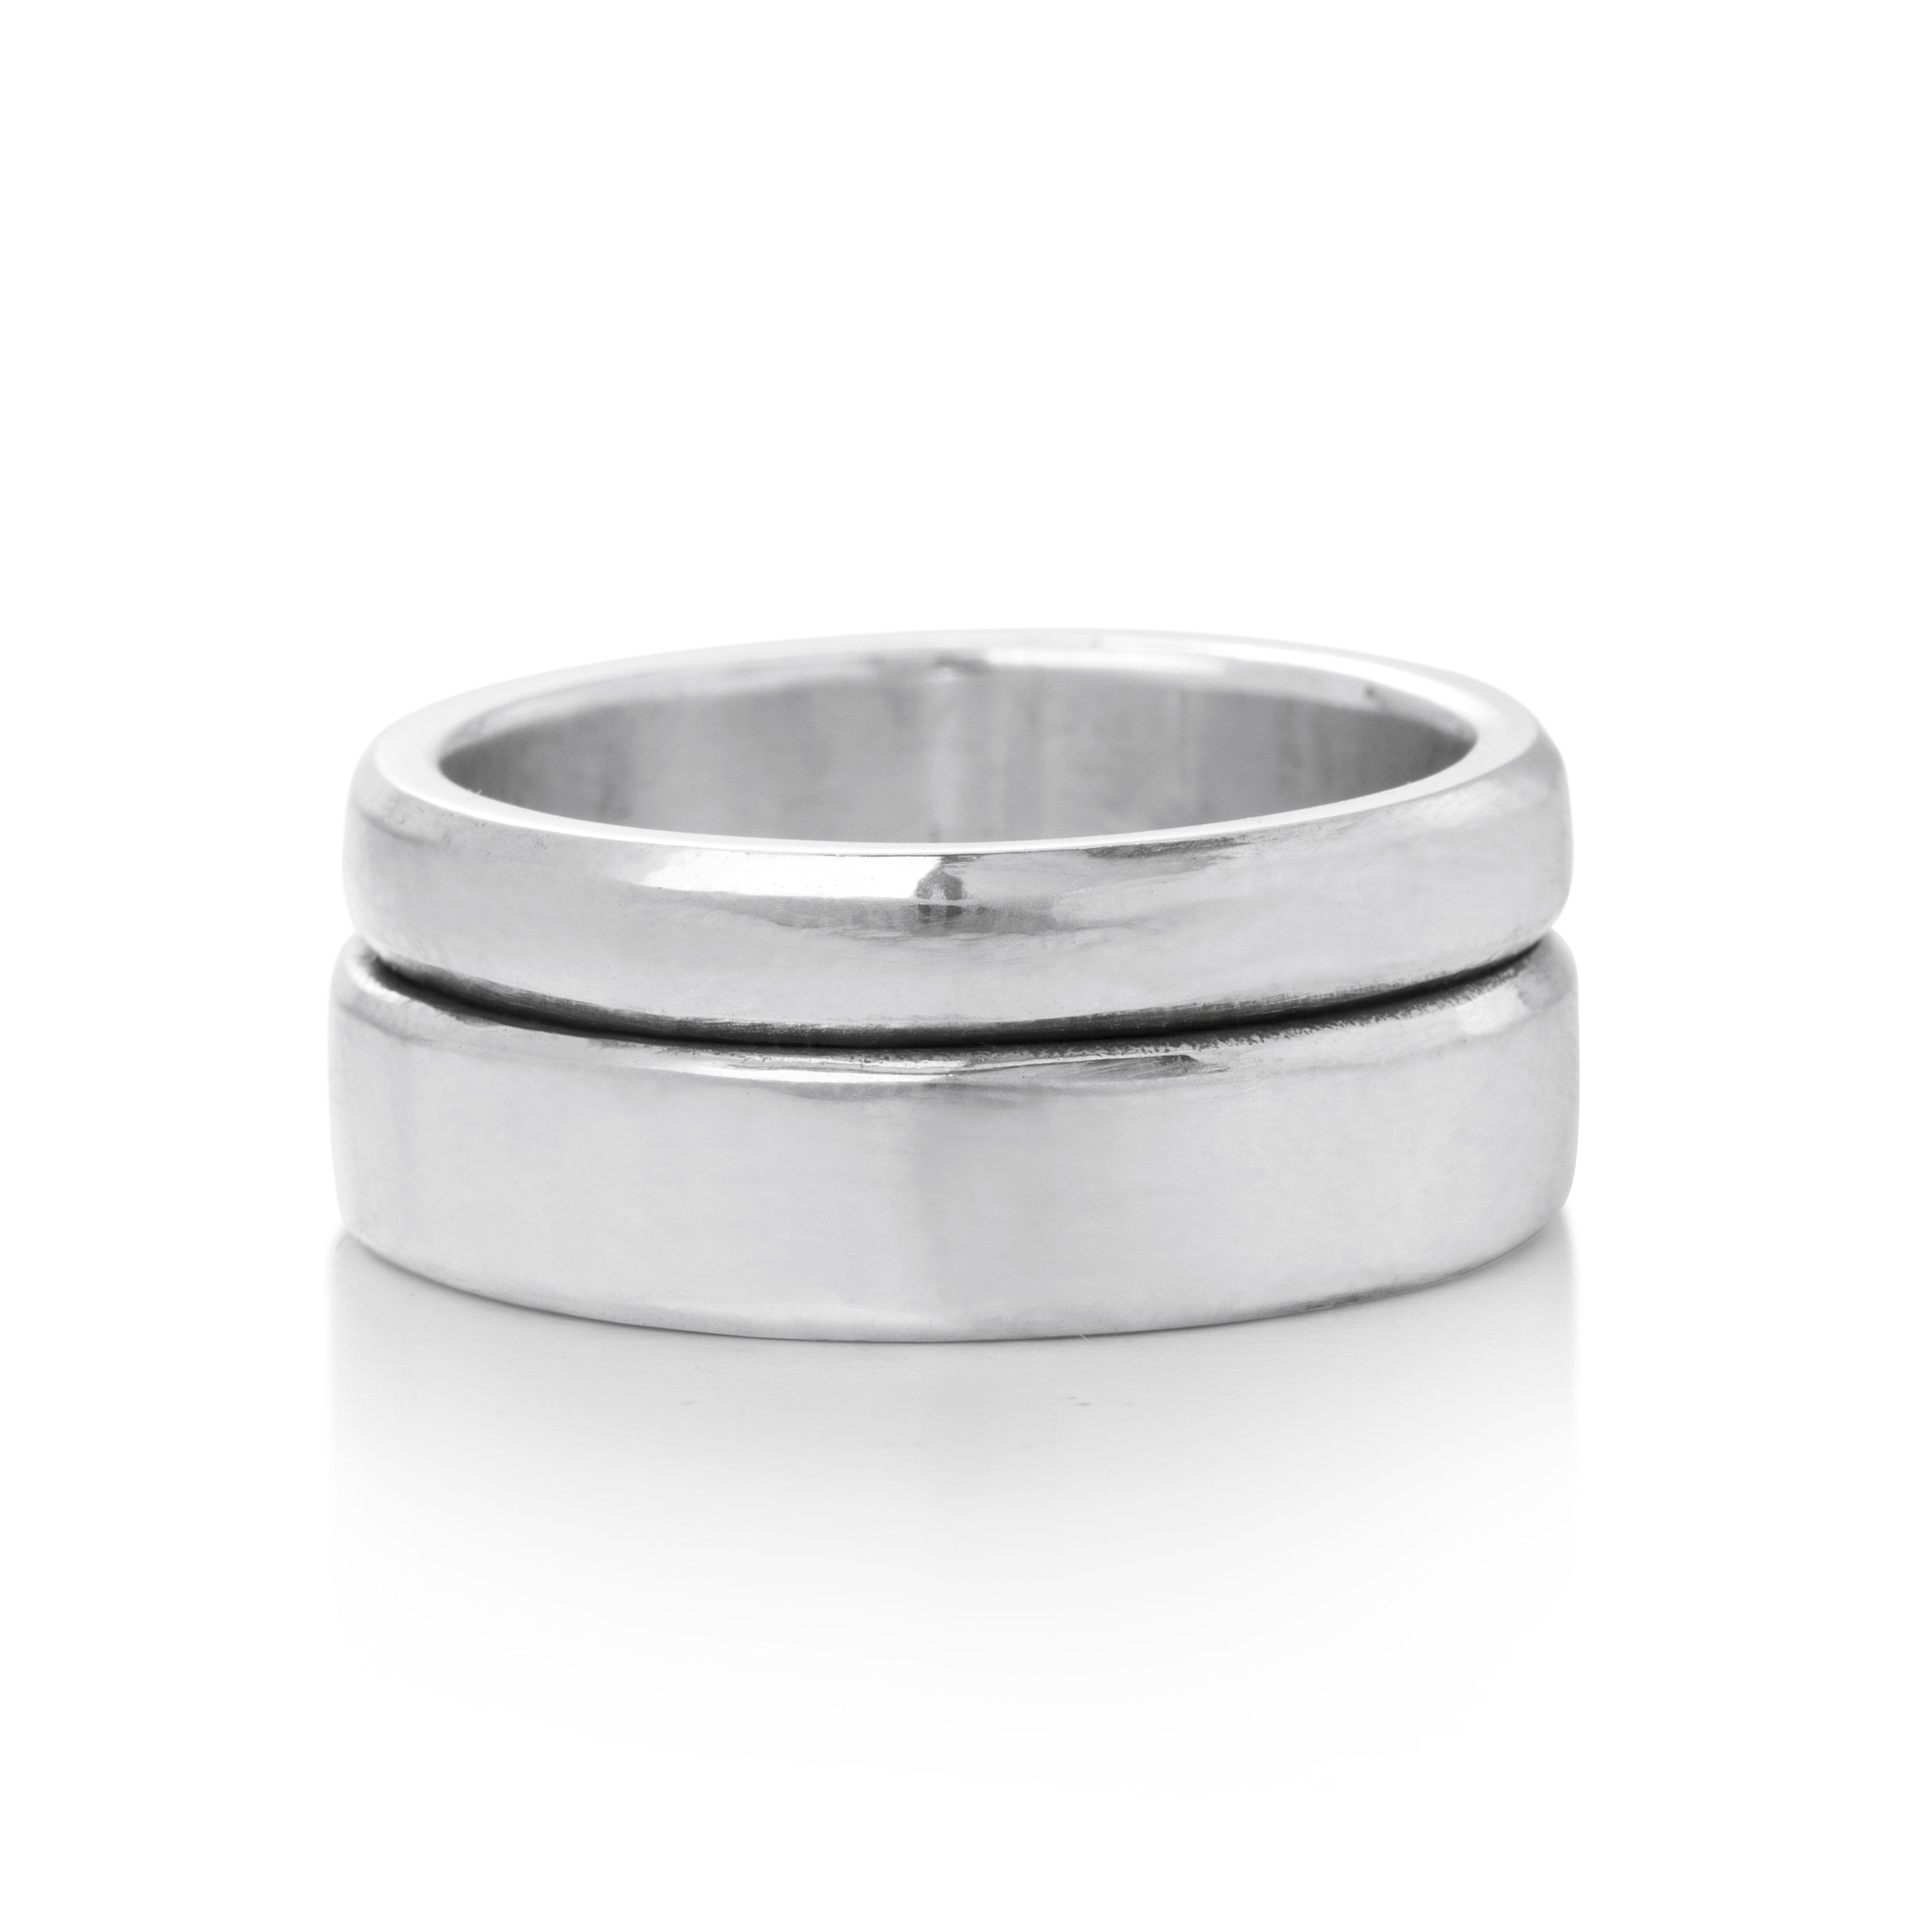 Solid Sterling Silver bands appearing to be fused together creating a large stacked ring band